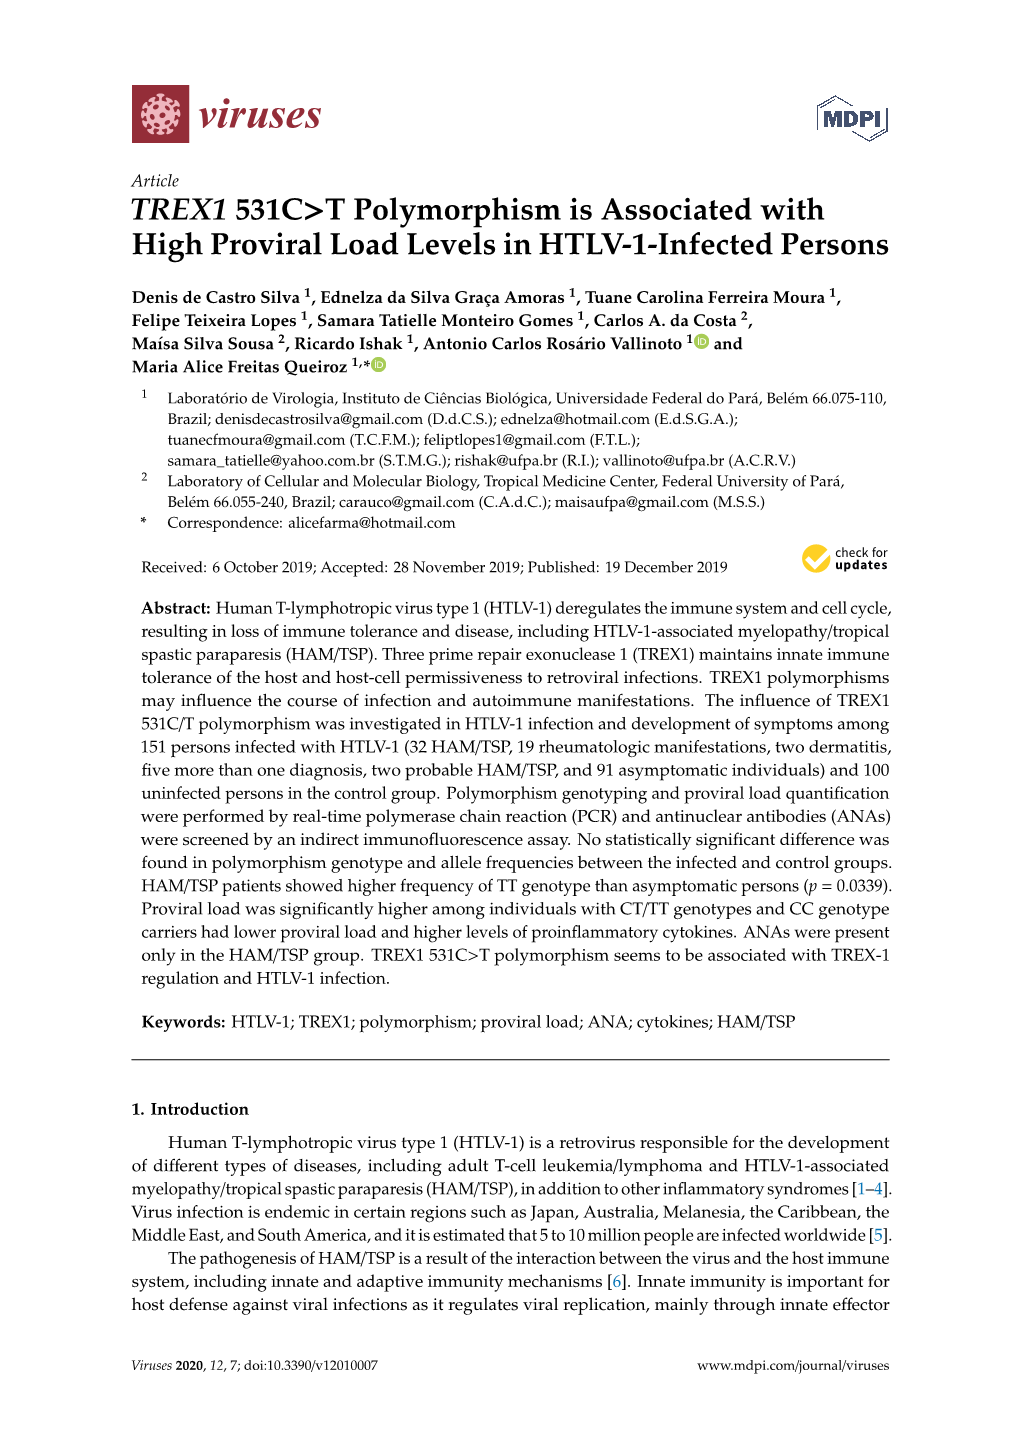 TREX1 531C&gt;T Polymorphism Is Associated with High Proviral Load